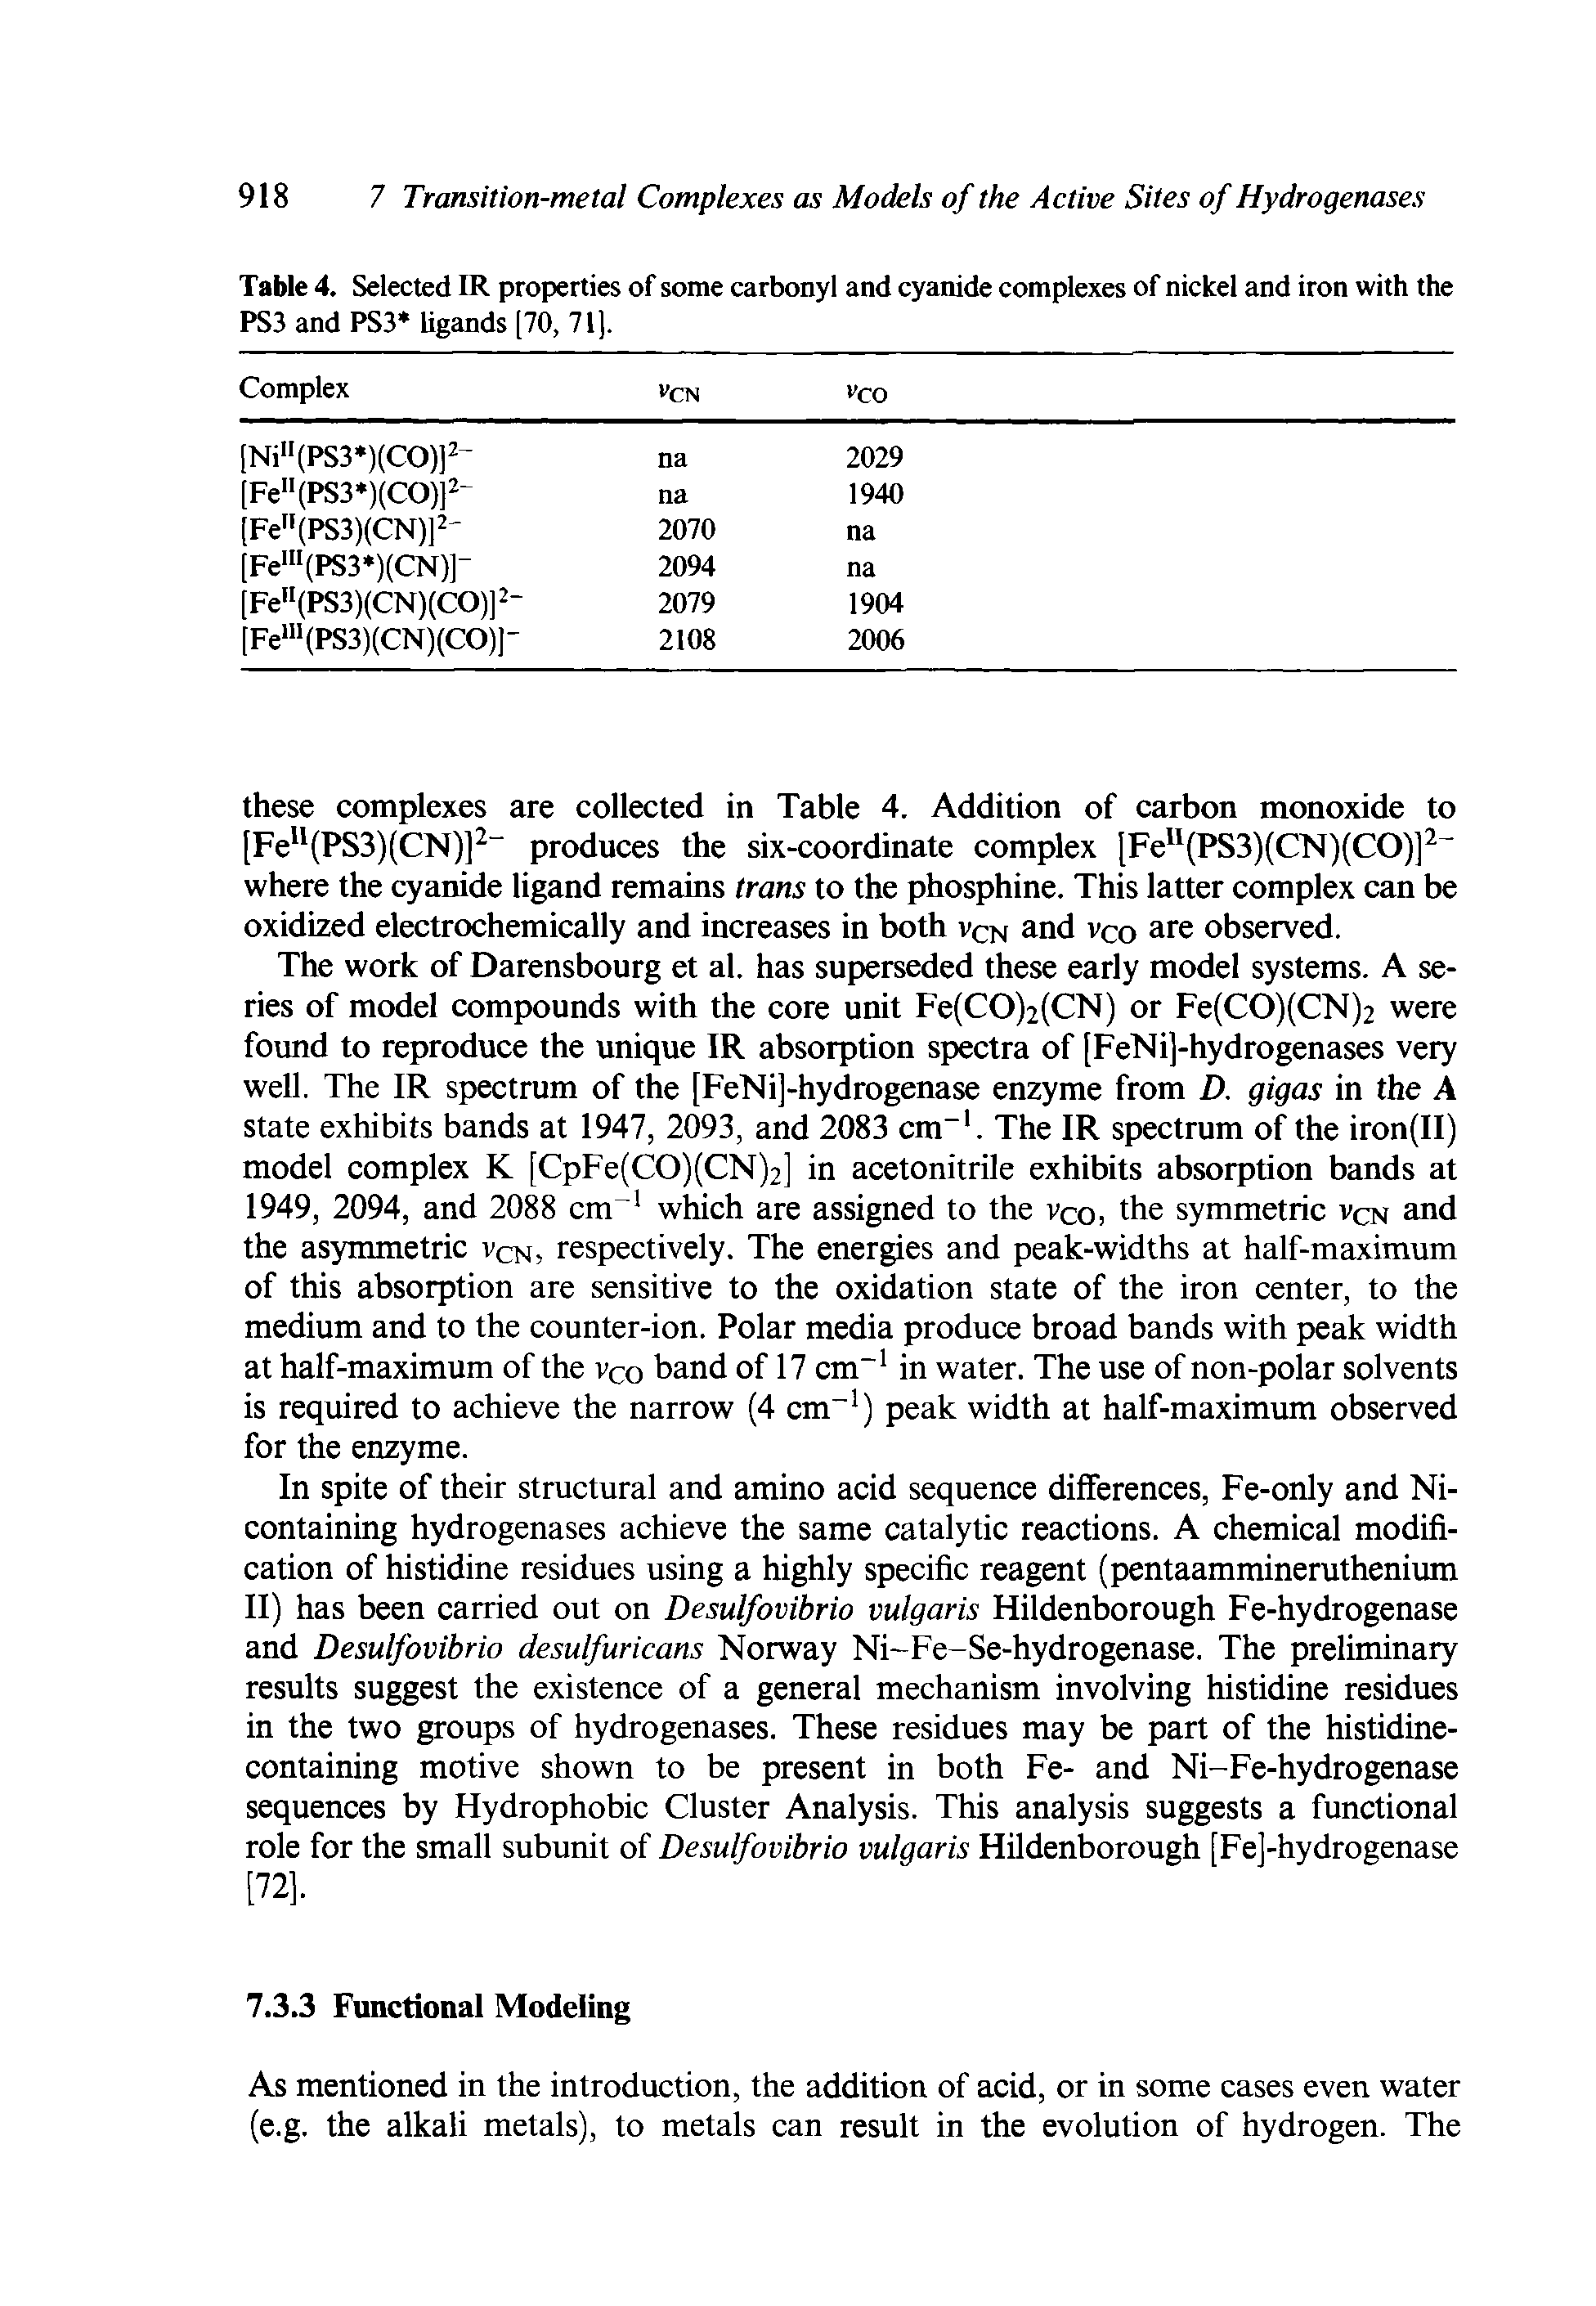 Table 4. Selected IR properties of some carbonyl and cyanide complexes of nickel and iron with the PS3 and PS3 ligands [70, 71).